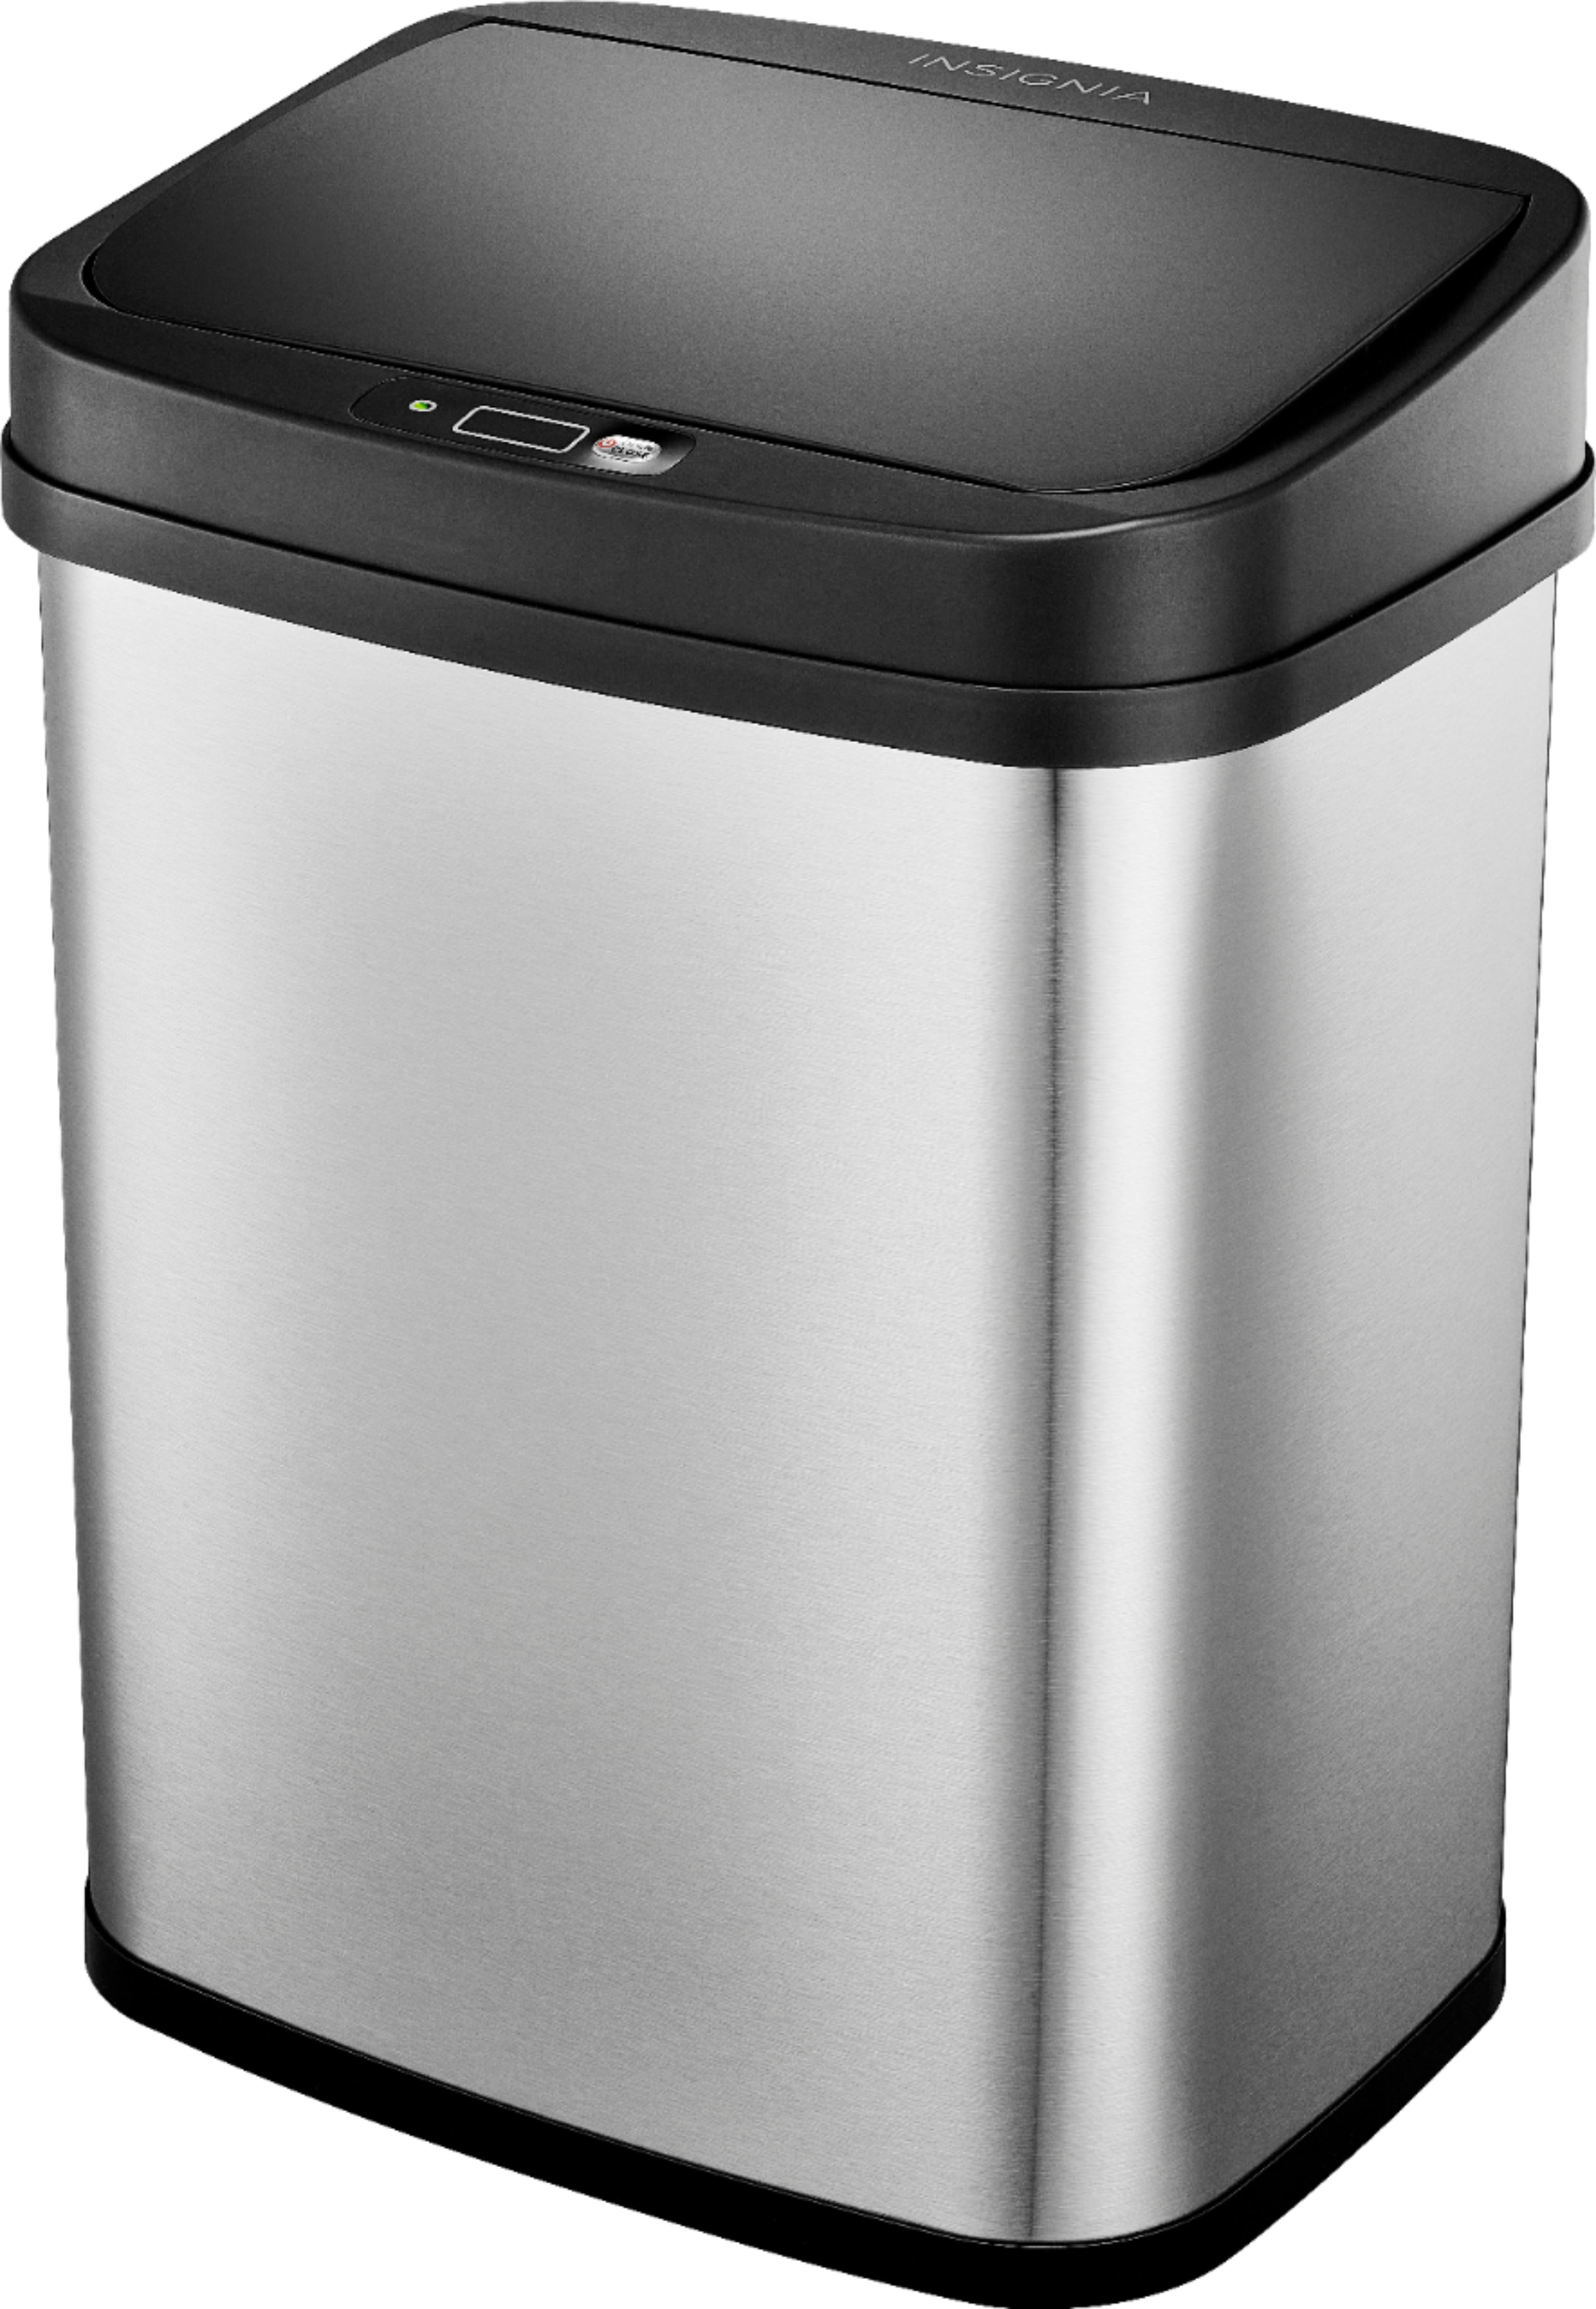 3-Gallon Insignia Automatic Trash Can (Stainless Steel) $20 + Free Curbside Pickup